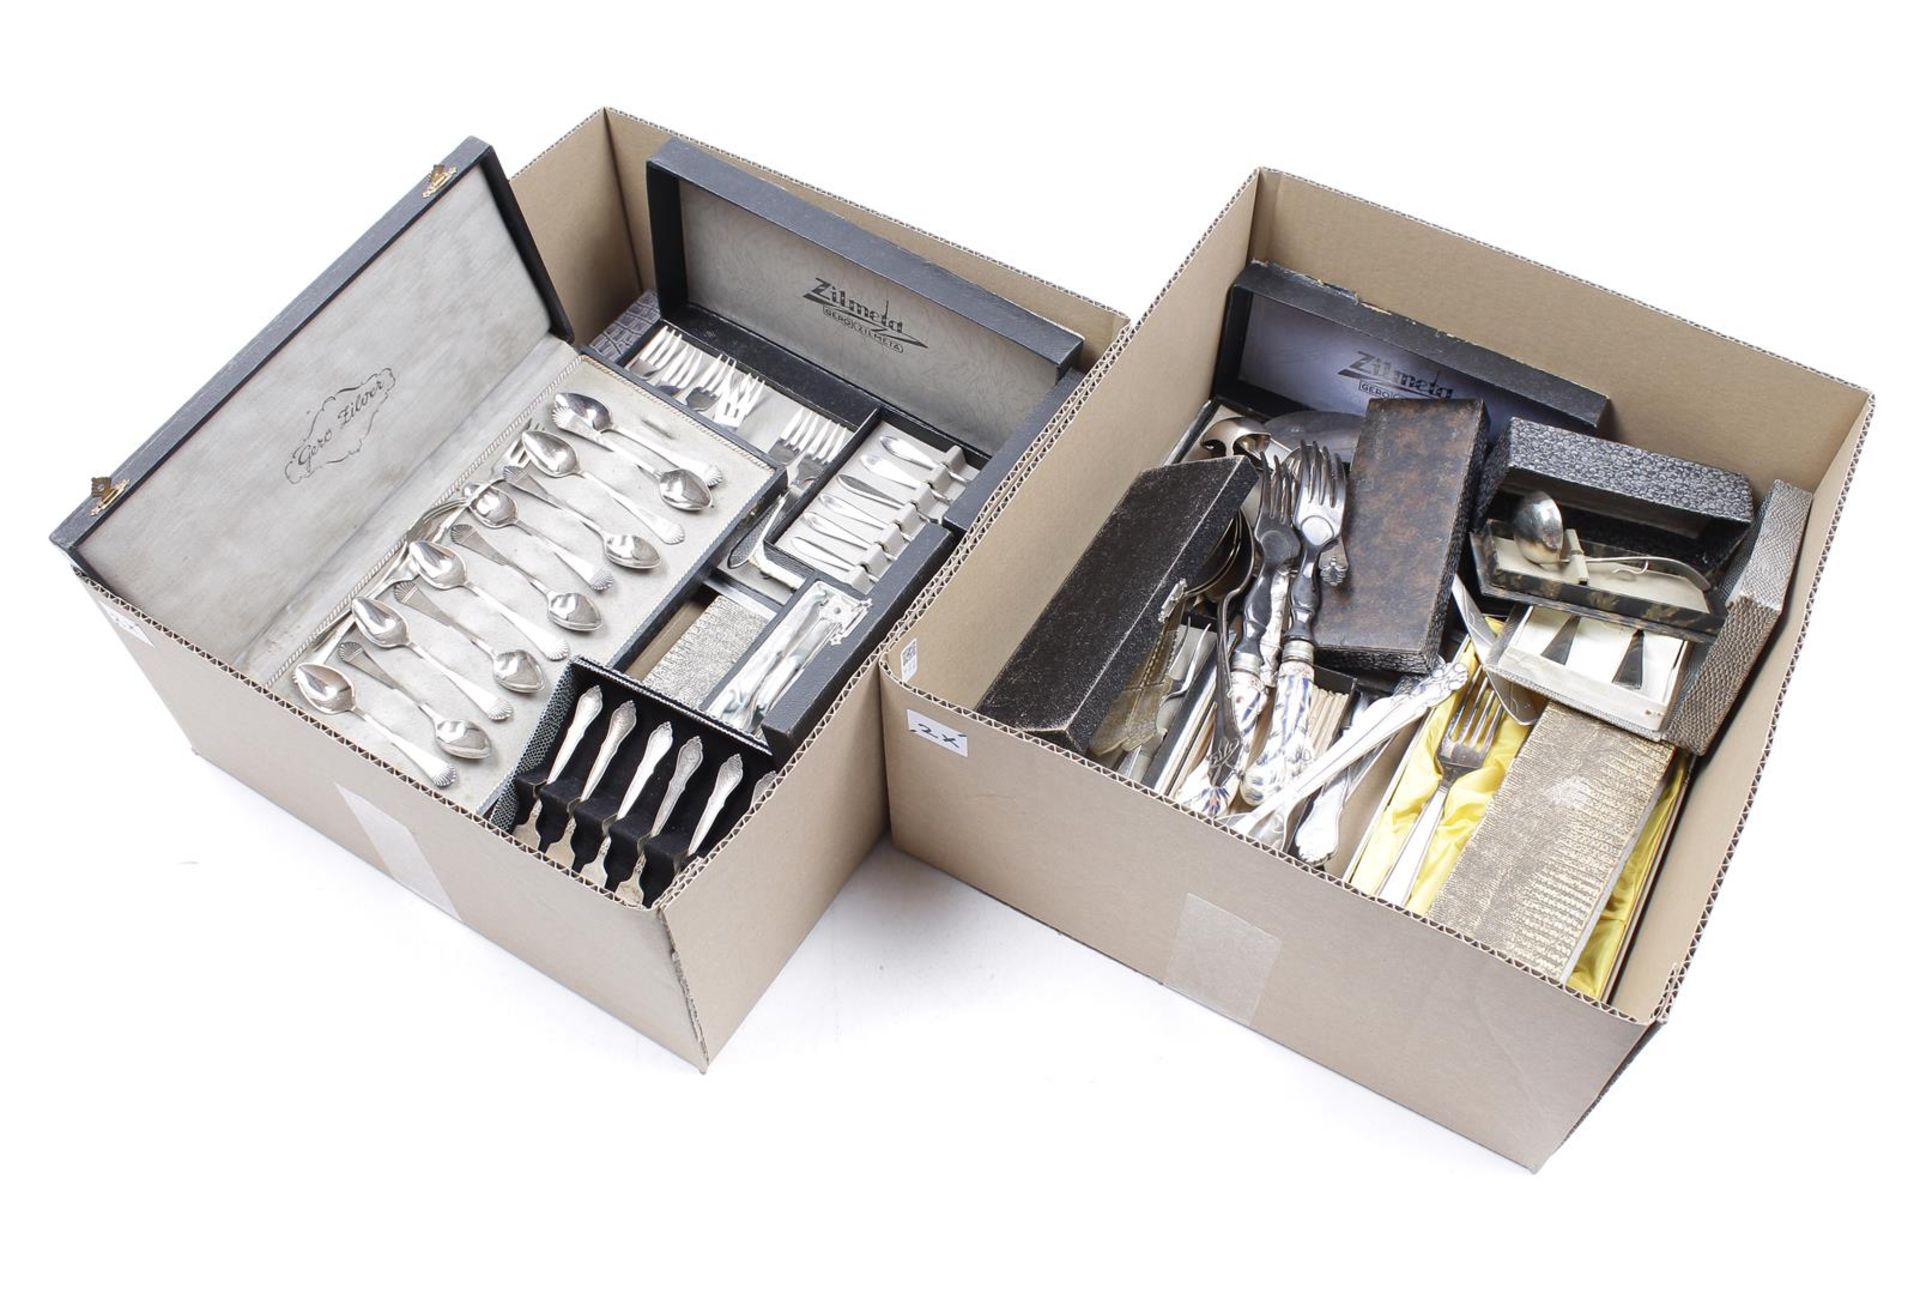 2 boxes with various Gero cutlery